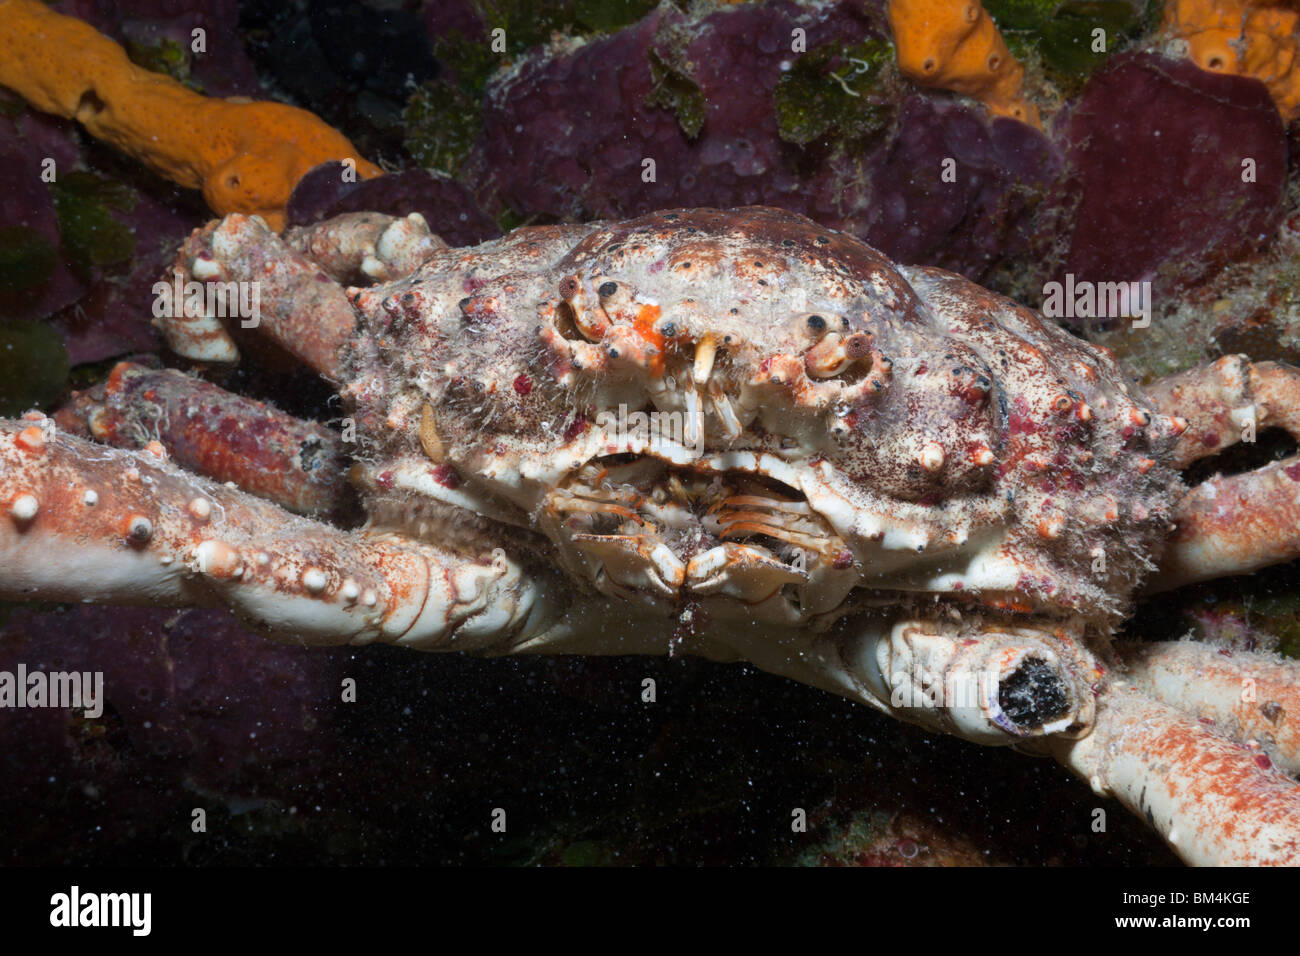 Reef Spider Crab, Mithrax spinosissimus, Cozumel, Caribbean Sea, Mexico Stock Photo